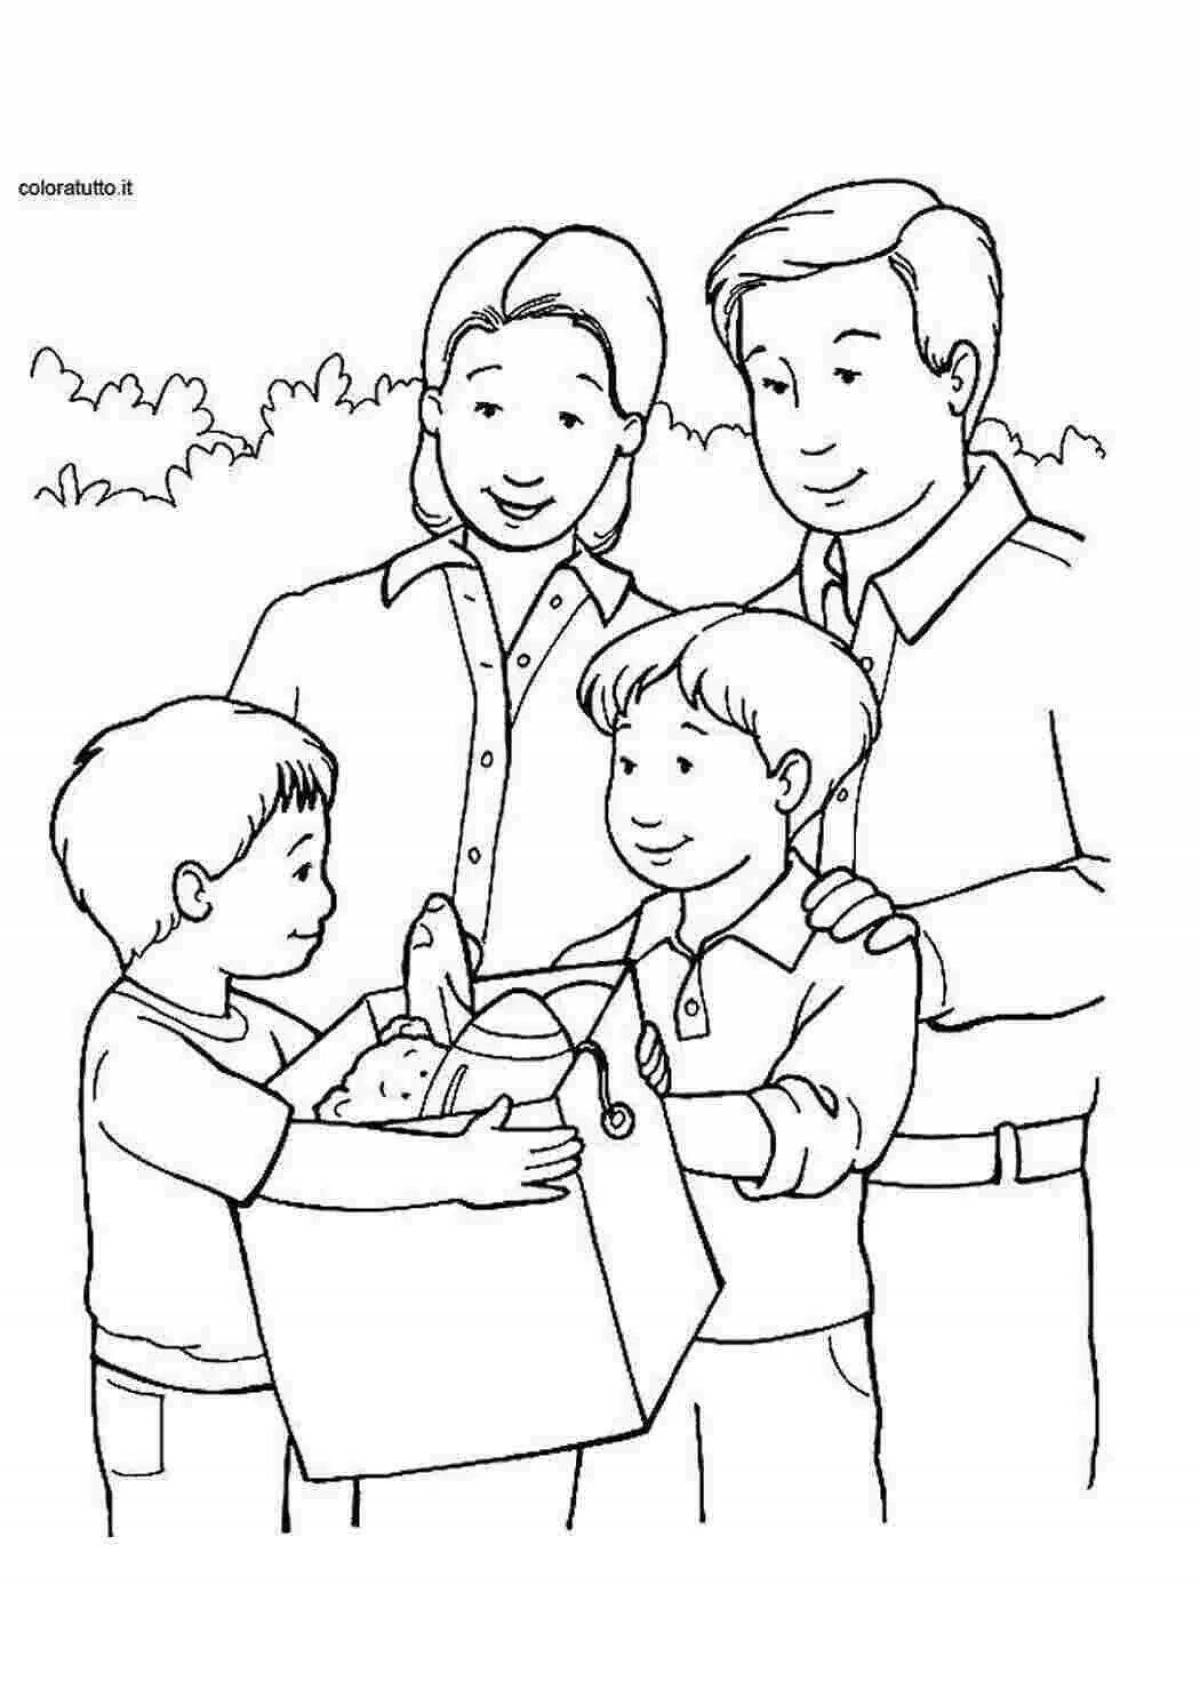 Fantastic coloring pages for kids